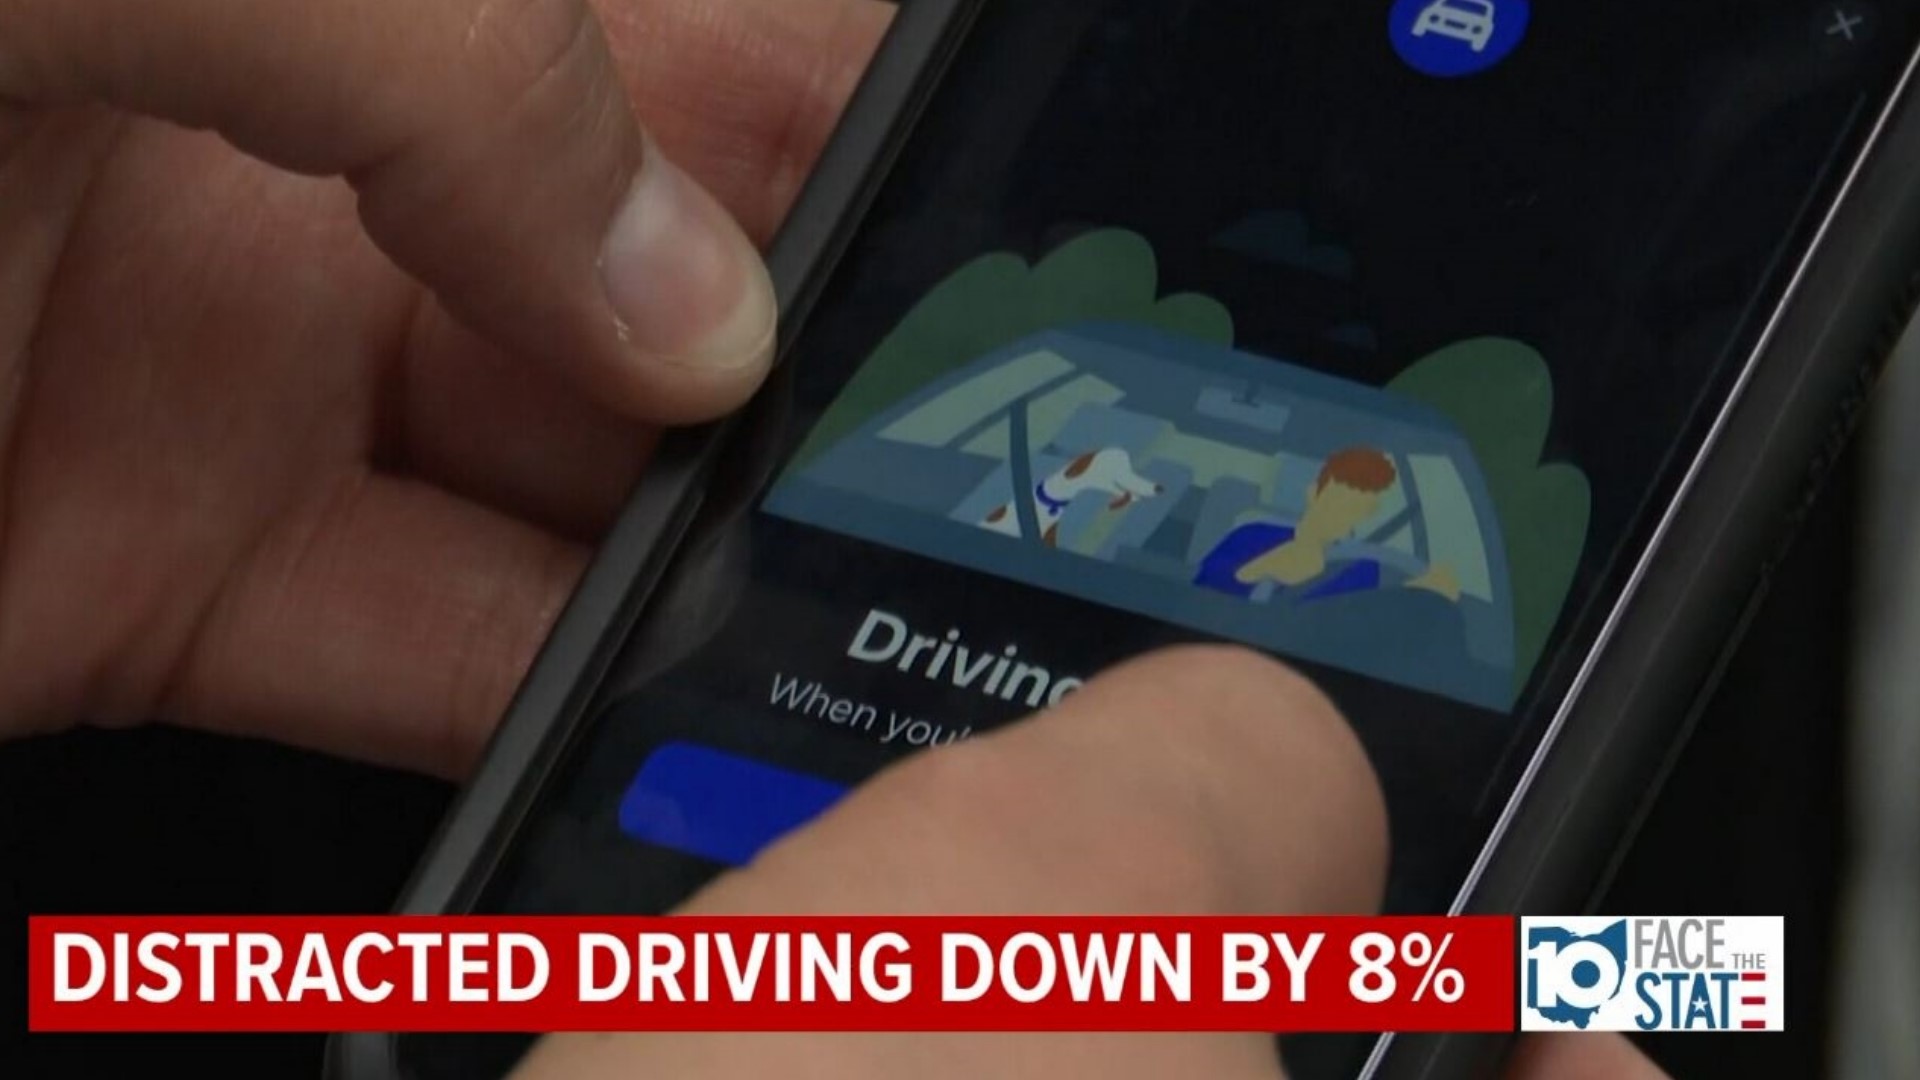 On this week's Face the State, we explore why distracted driving is down 8% and why demonstrators have been protesting against changes to the state's constitution.